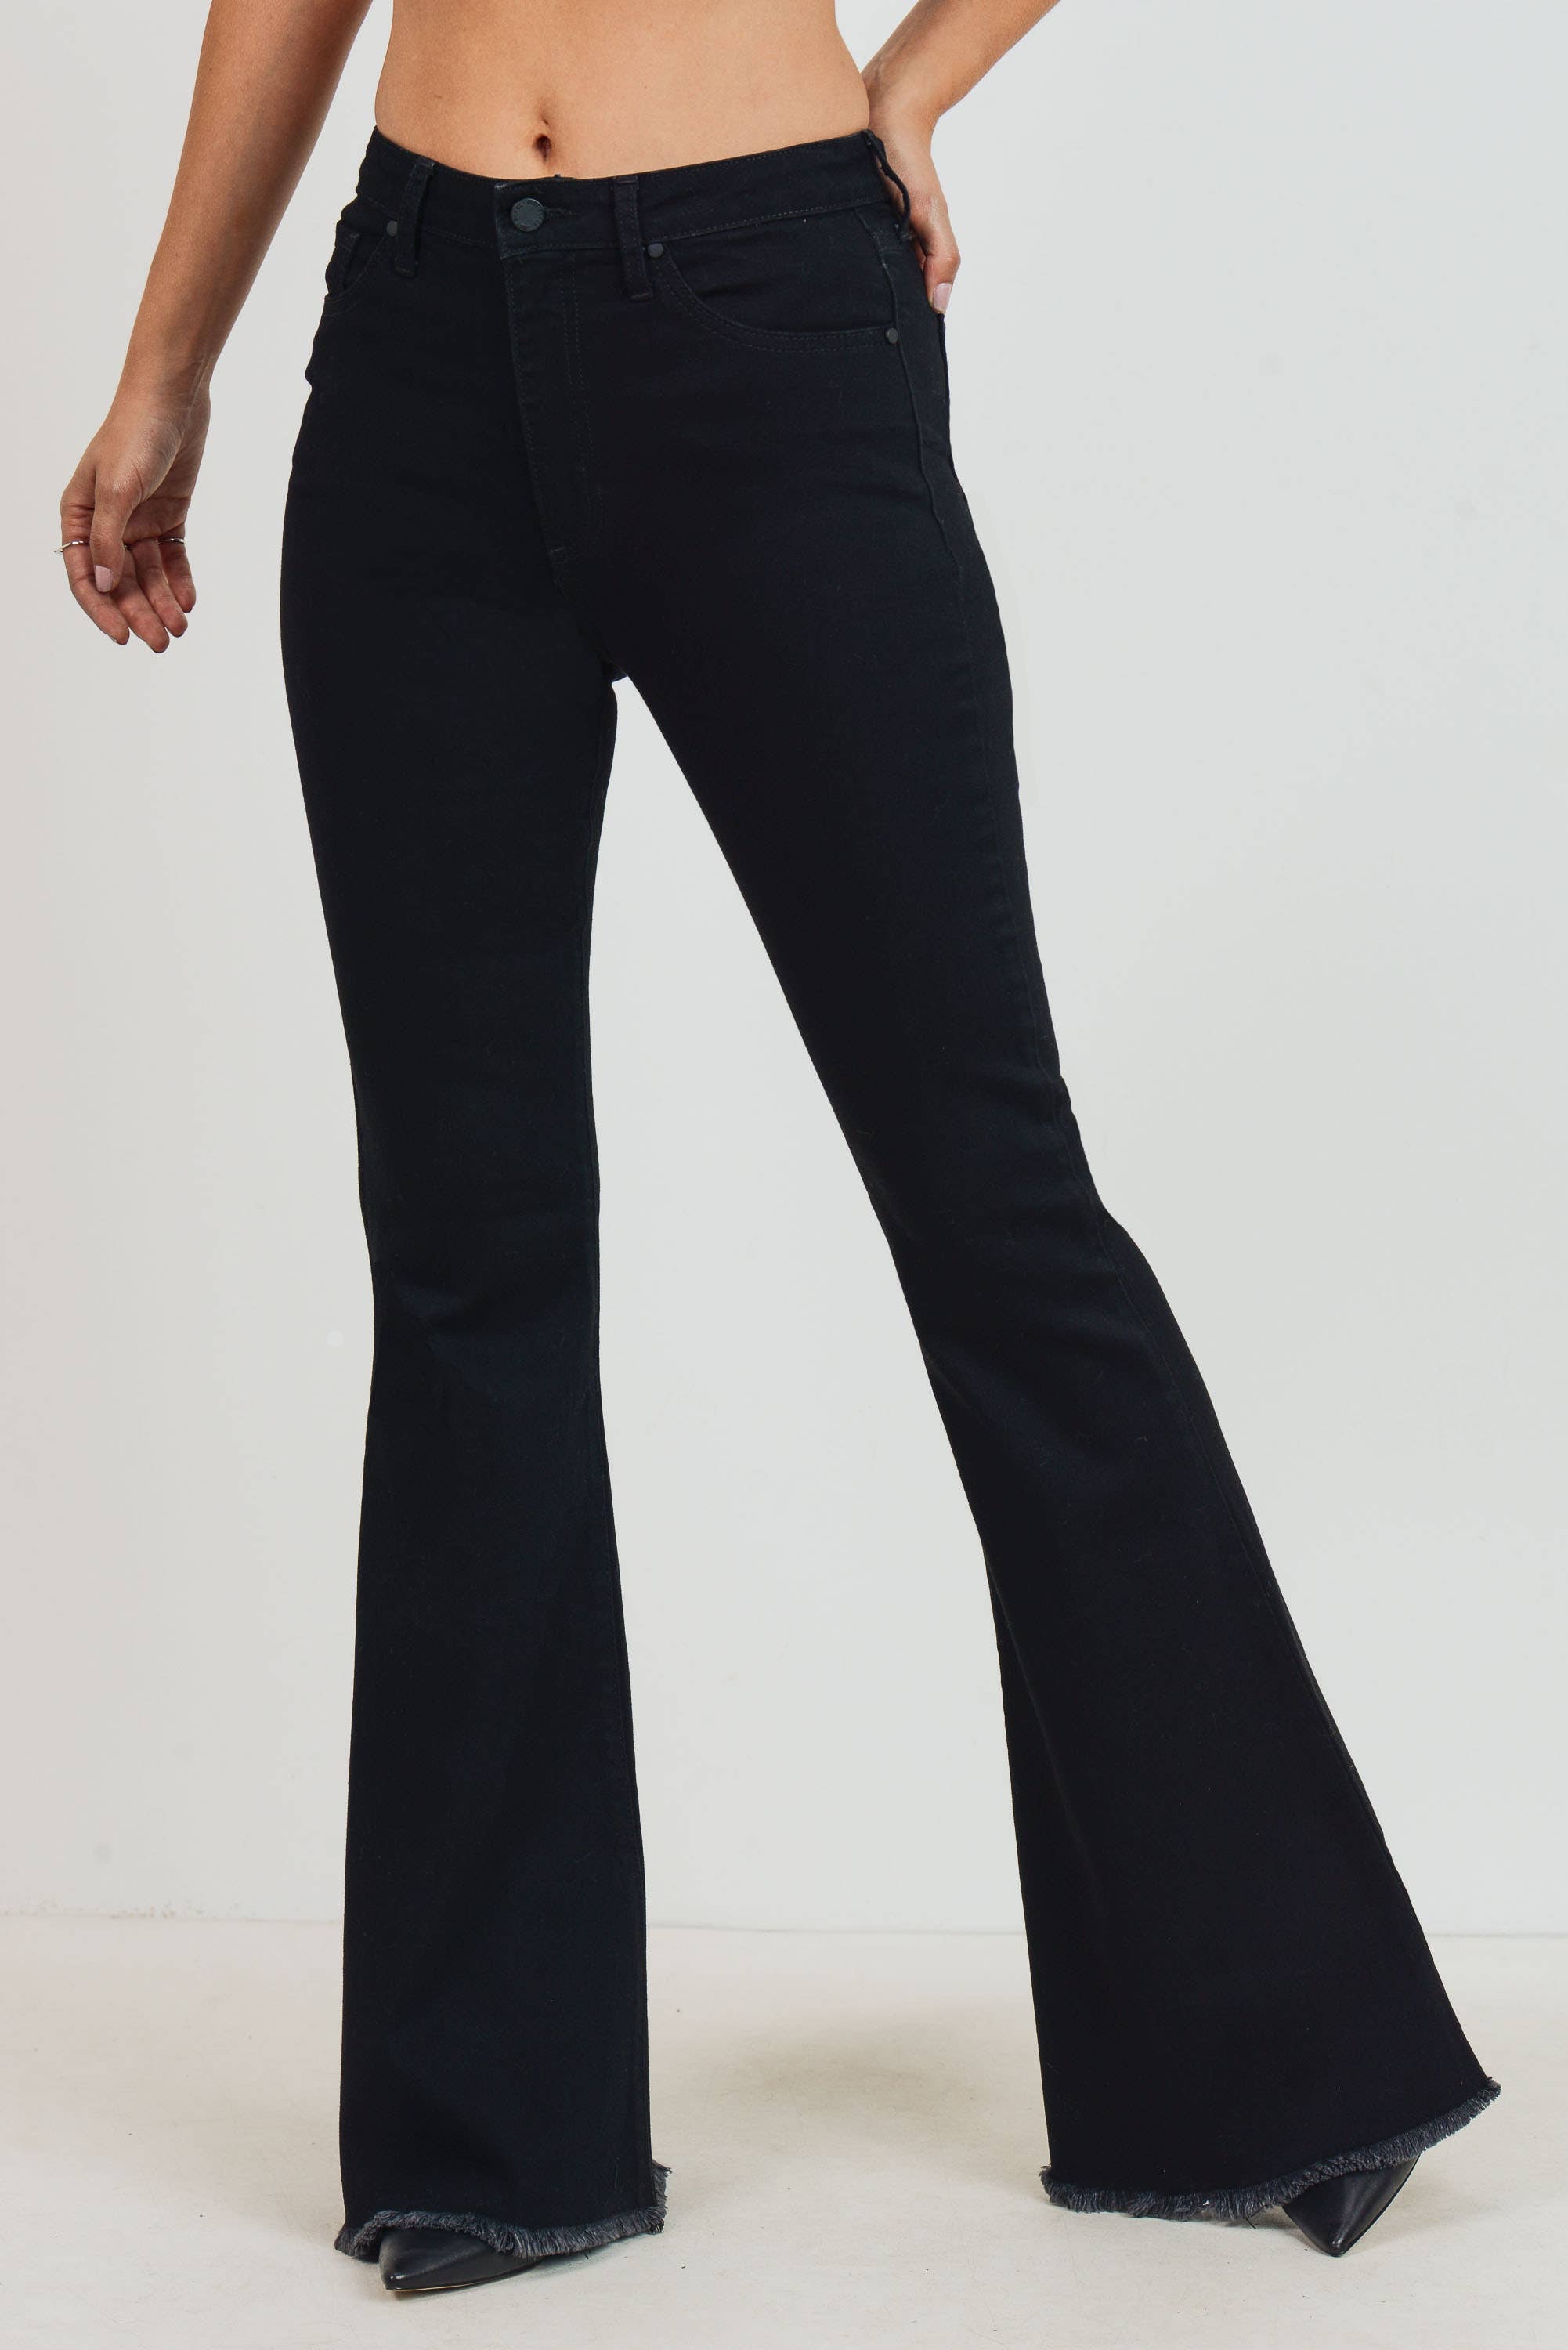 Diktat byrde Spille computerspil The Classic High Rise Bell Bottom Jeans By Just Black Denim – Thread + Seed